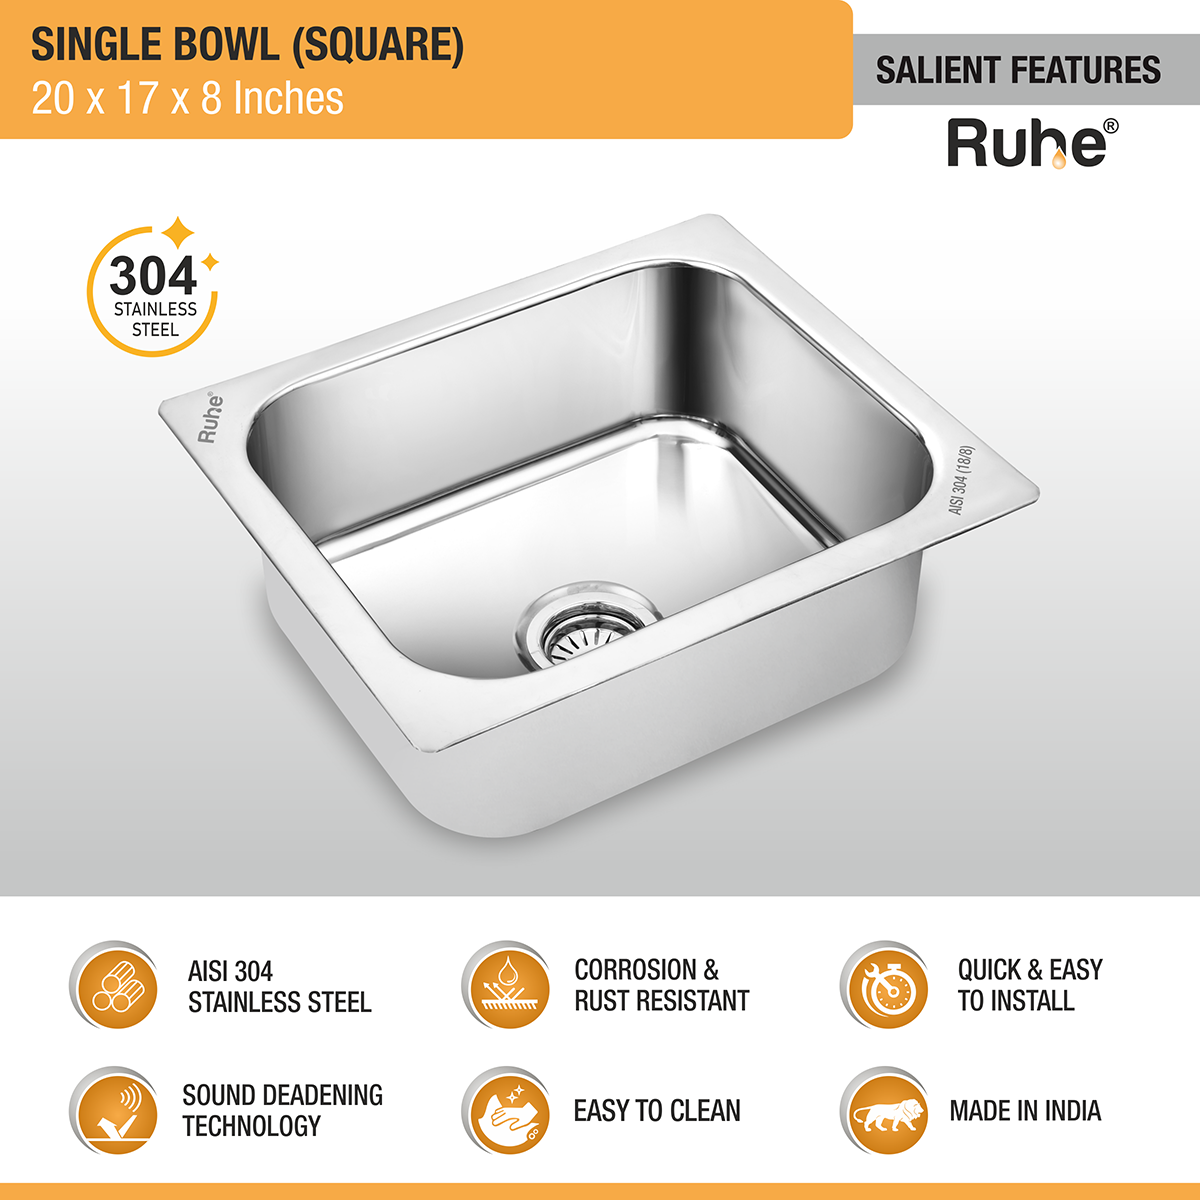 Square Single Bowl (20 x 17 x 8 inches) 304-Grade Kitchen Sink features and benefits